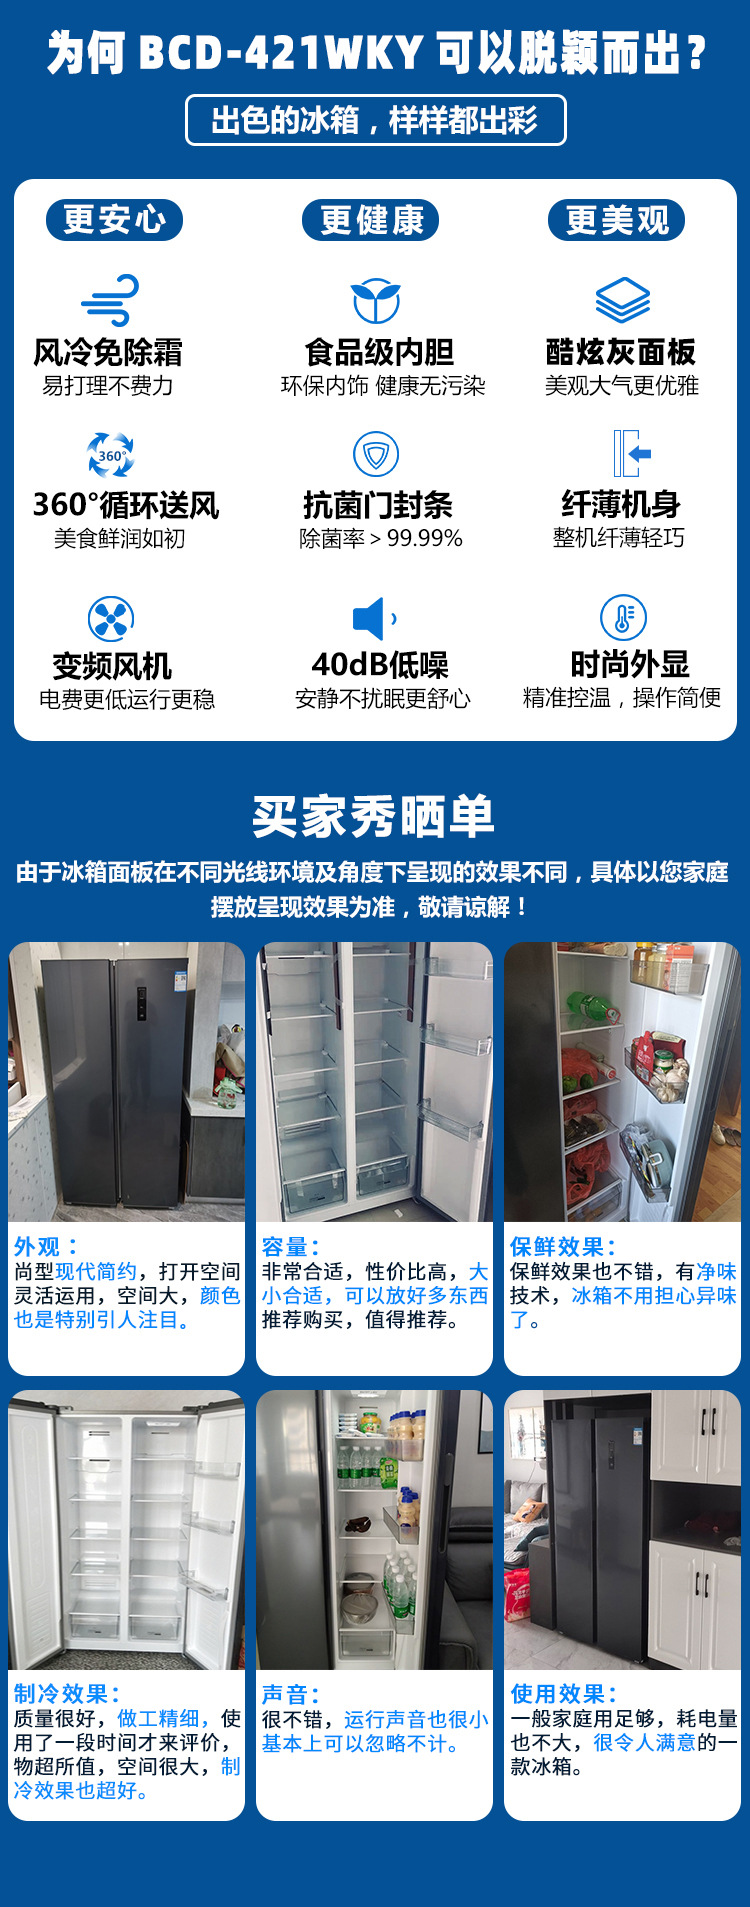 Skyworth Household Door-to-door Refrigerator Air-cooled Frost-free Energy-saving Frequency Conversion Intelligent Temperature Control Slim And Clean Taste 421 Liters.